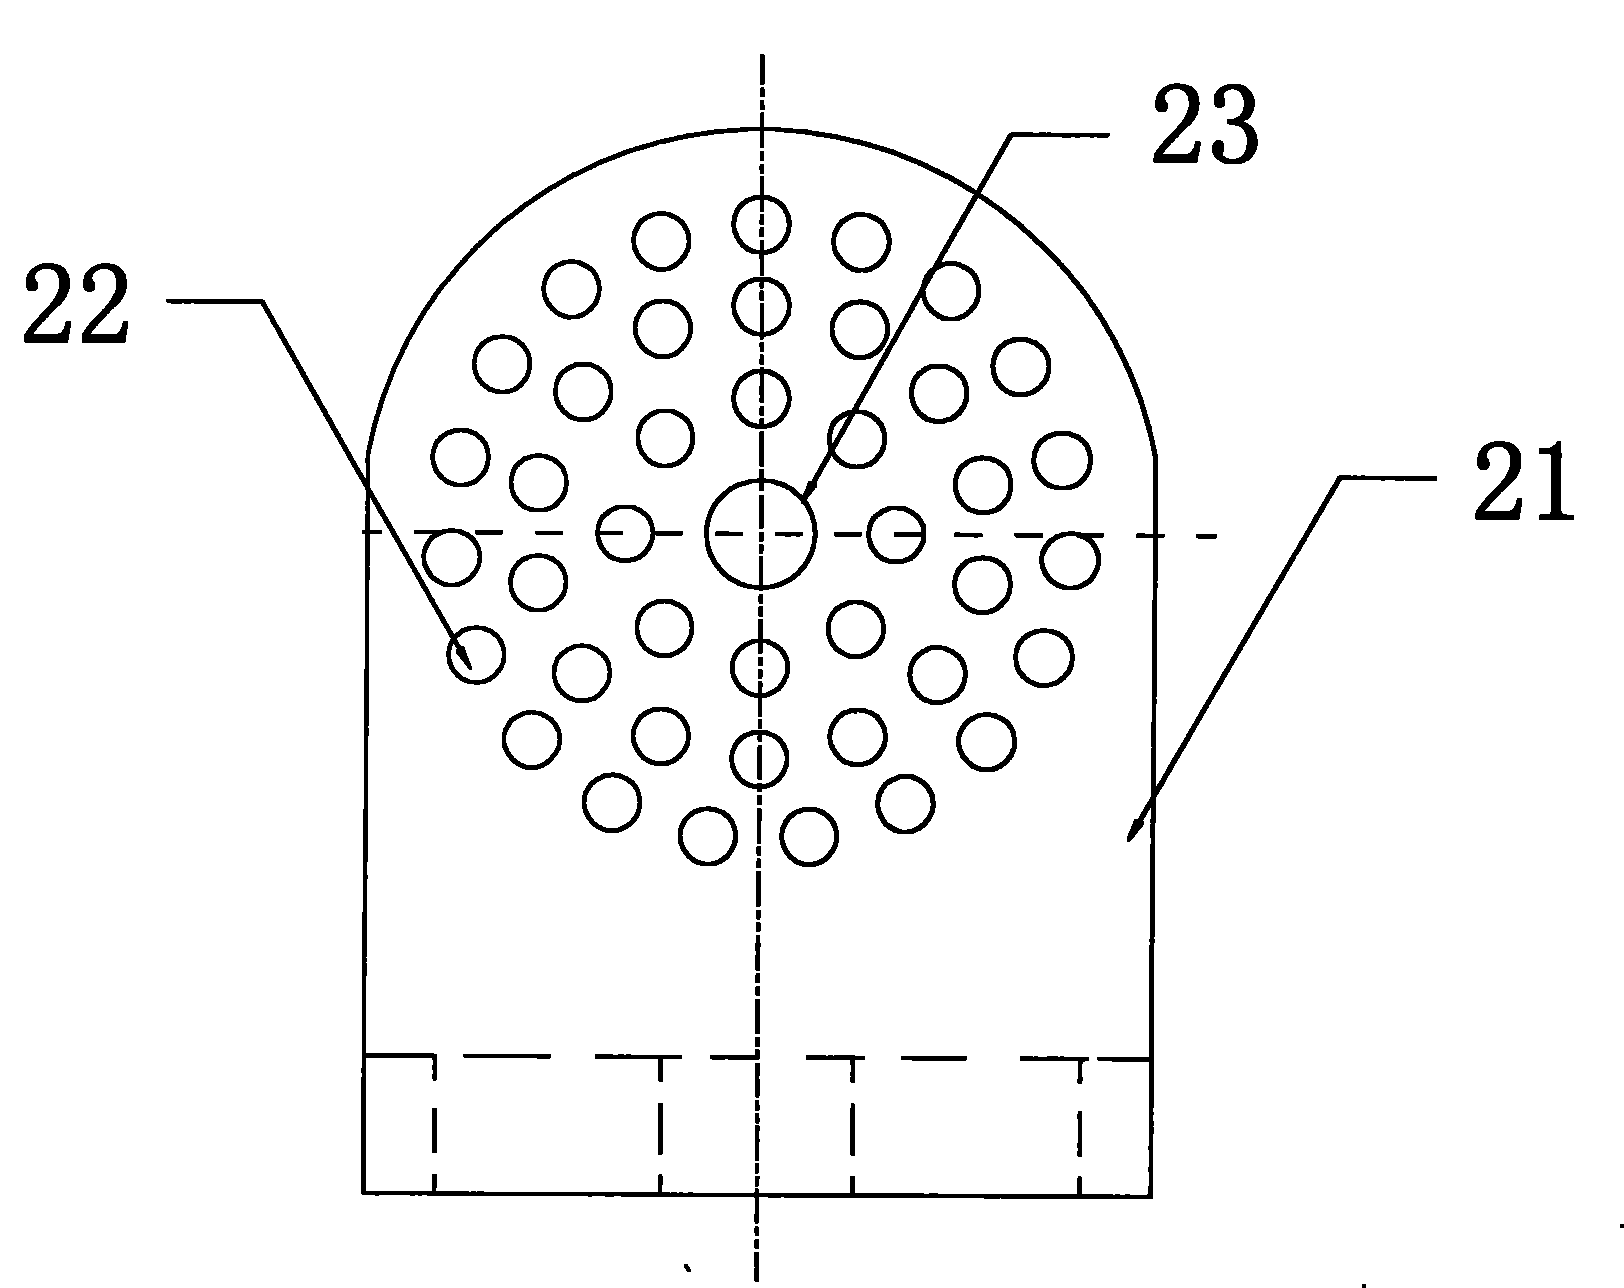 Manufacture method for layered arrangement of multilayer cable cores